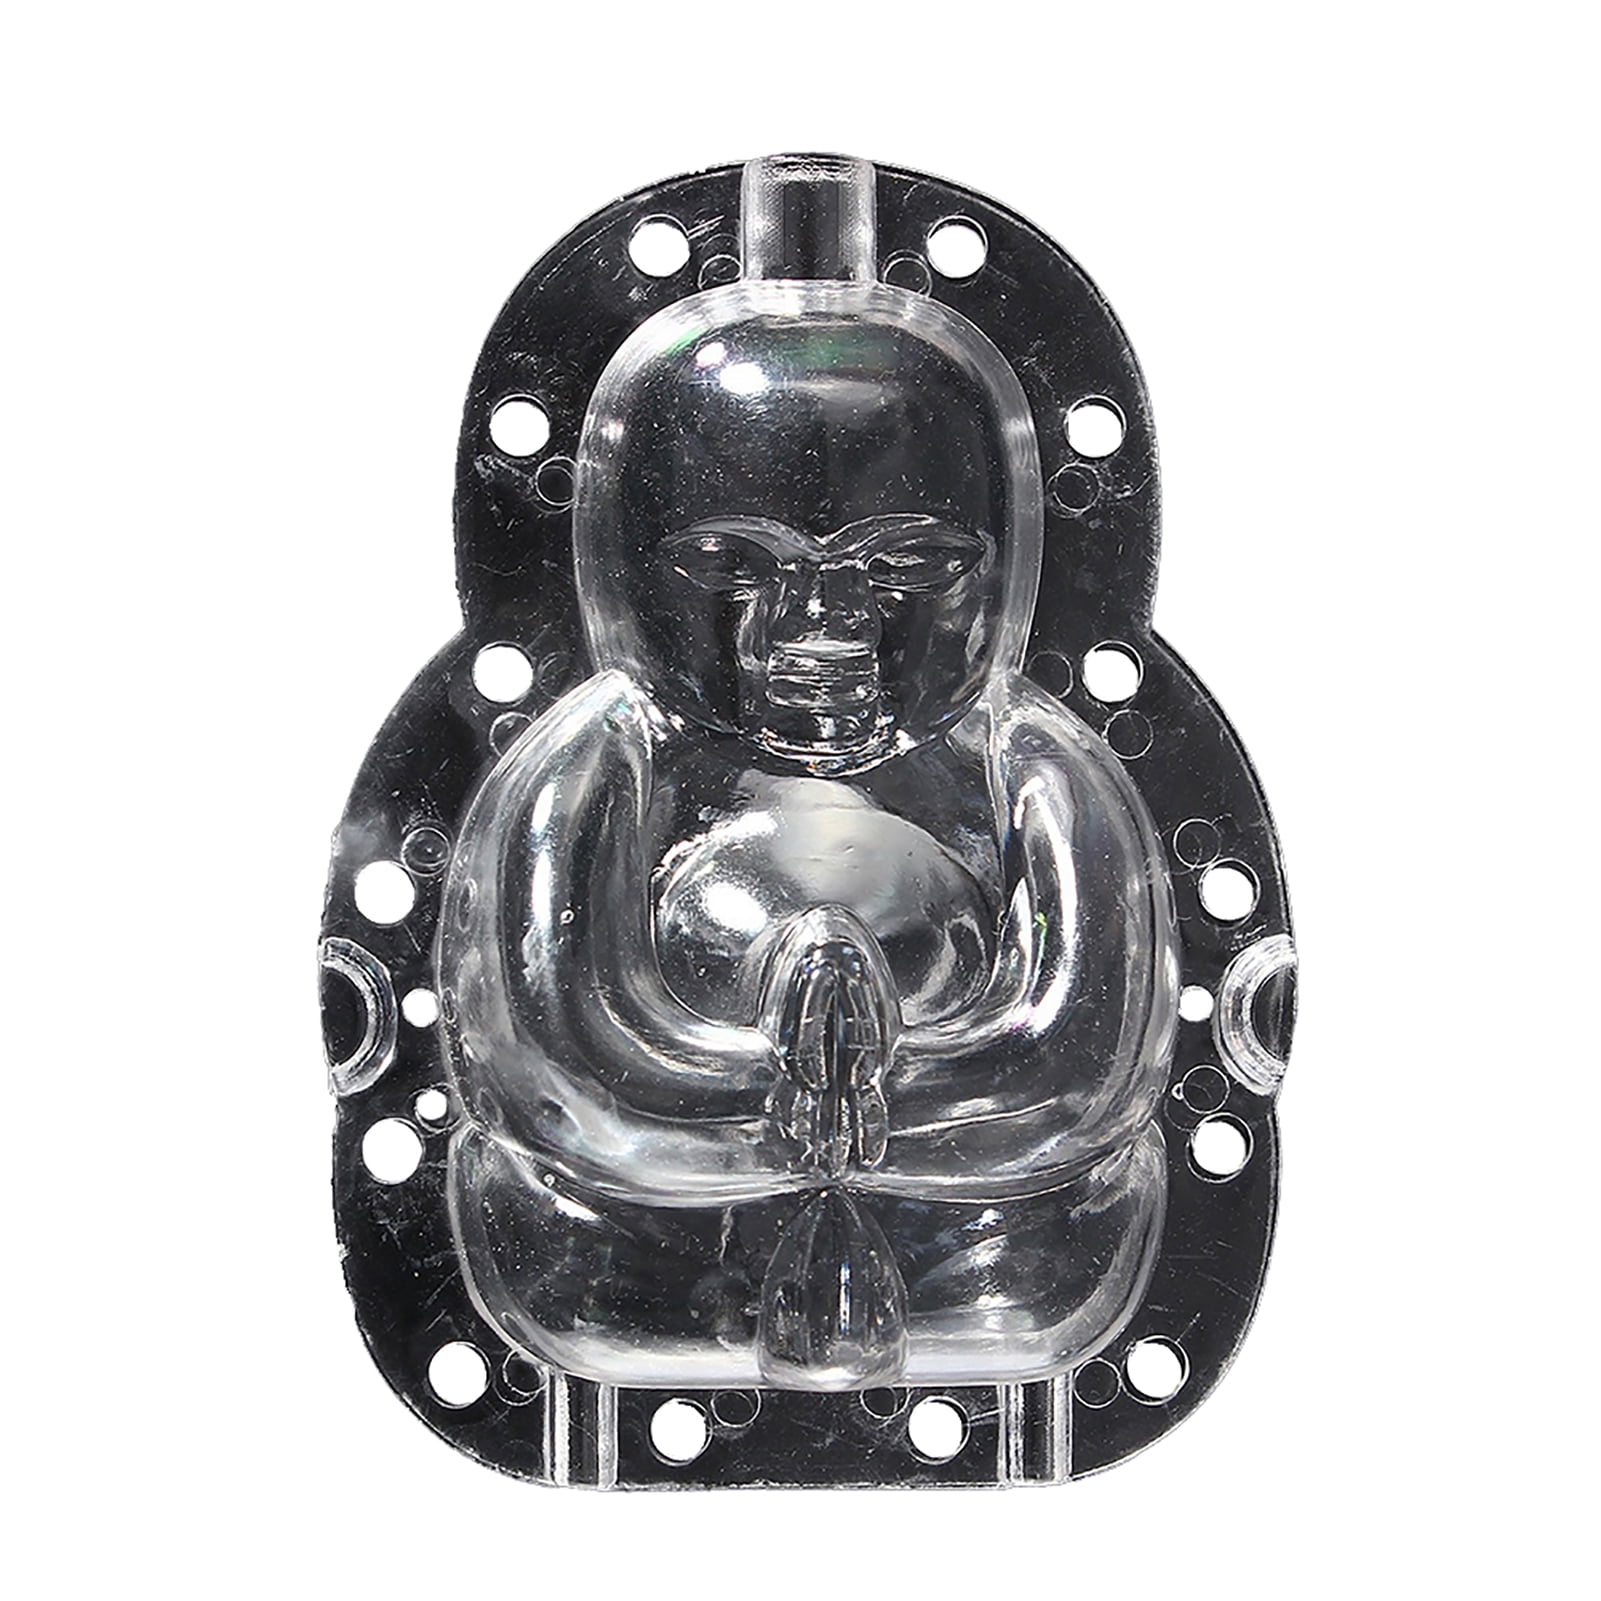 Buddha-shaped Fruits Shaping Mold Garden Pear Muskmelon etc Growth Forming Mold 